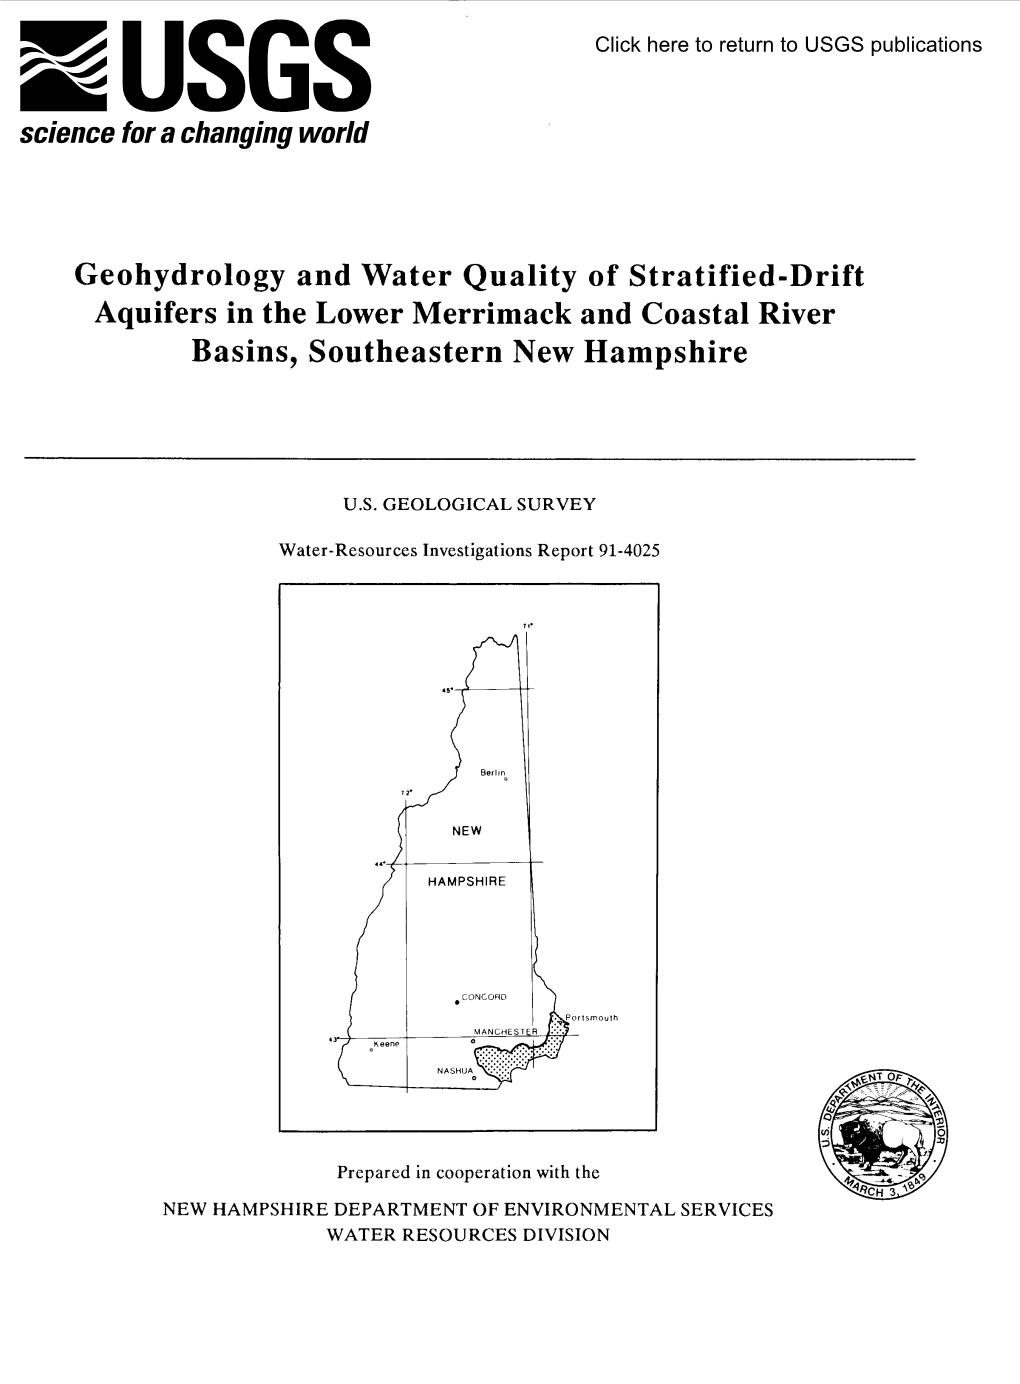 Geohydrology and Water Quality of Stratified-Drift Aquifers in the Lower Merrimack and Coastal River Basins, Southeastern New Hampshire